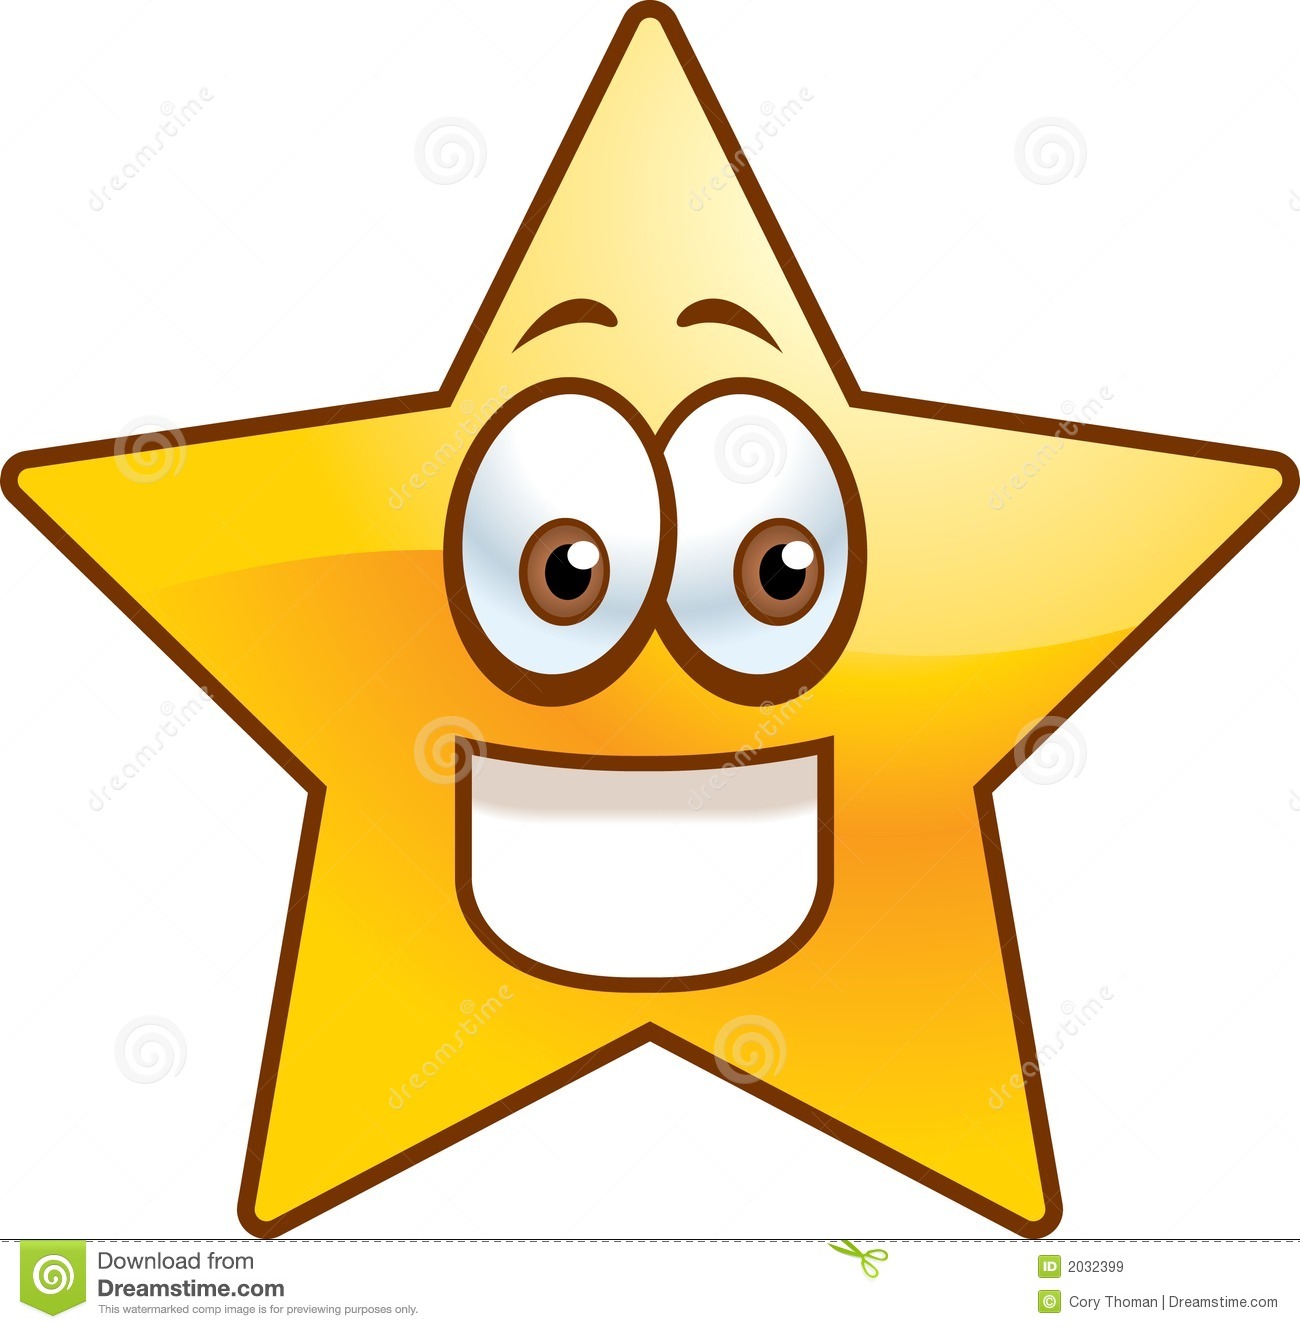 Star Shapes Clipart Free